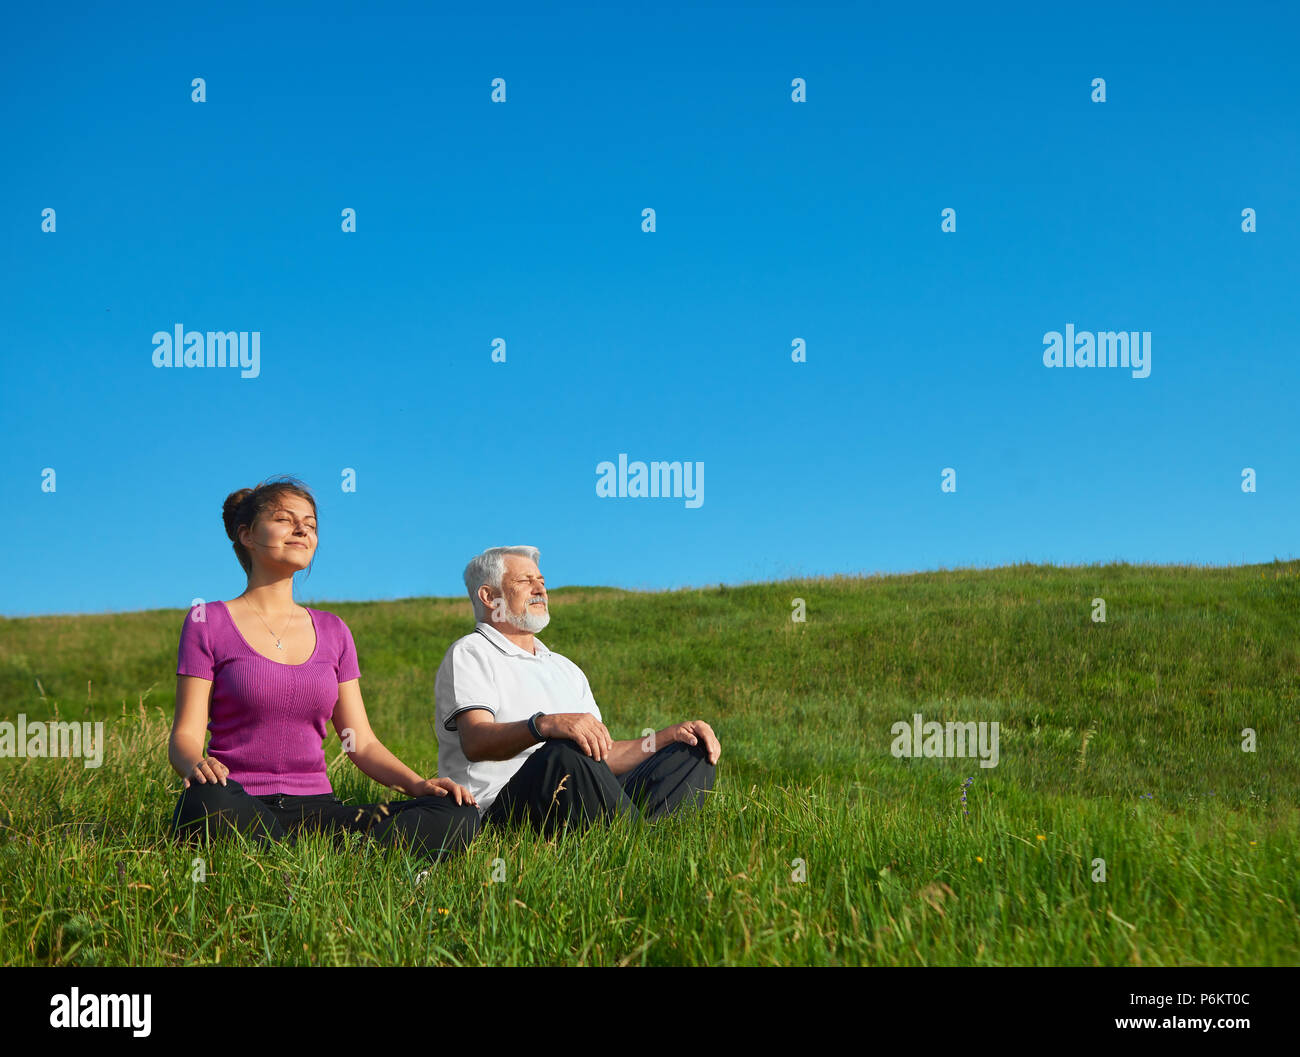 Young girl and old man meditating sitting in the field. Sitting in lotus pose on bright saturated sky background. Looking positive, satisfied, feeling good, concentrated. Calm and silent. Stock Photo